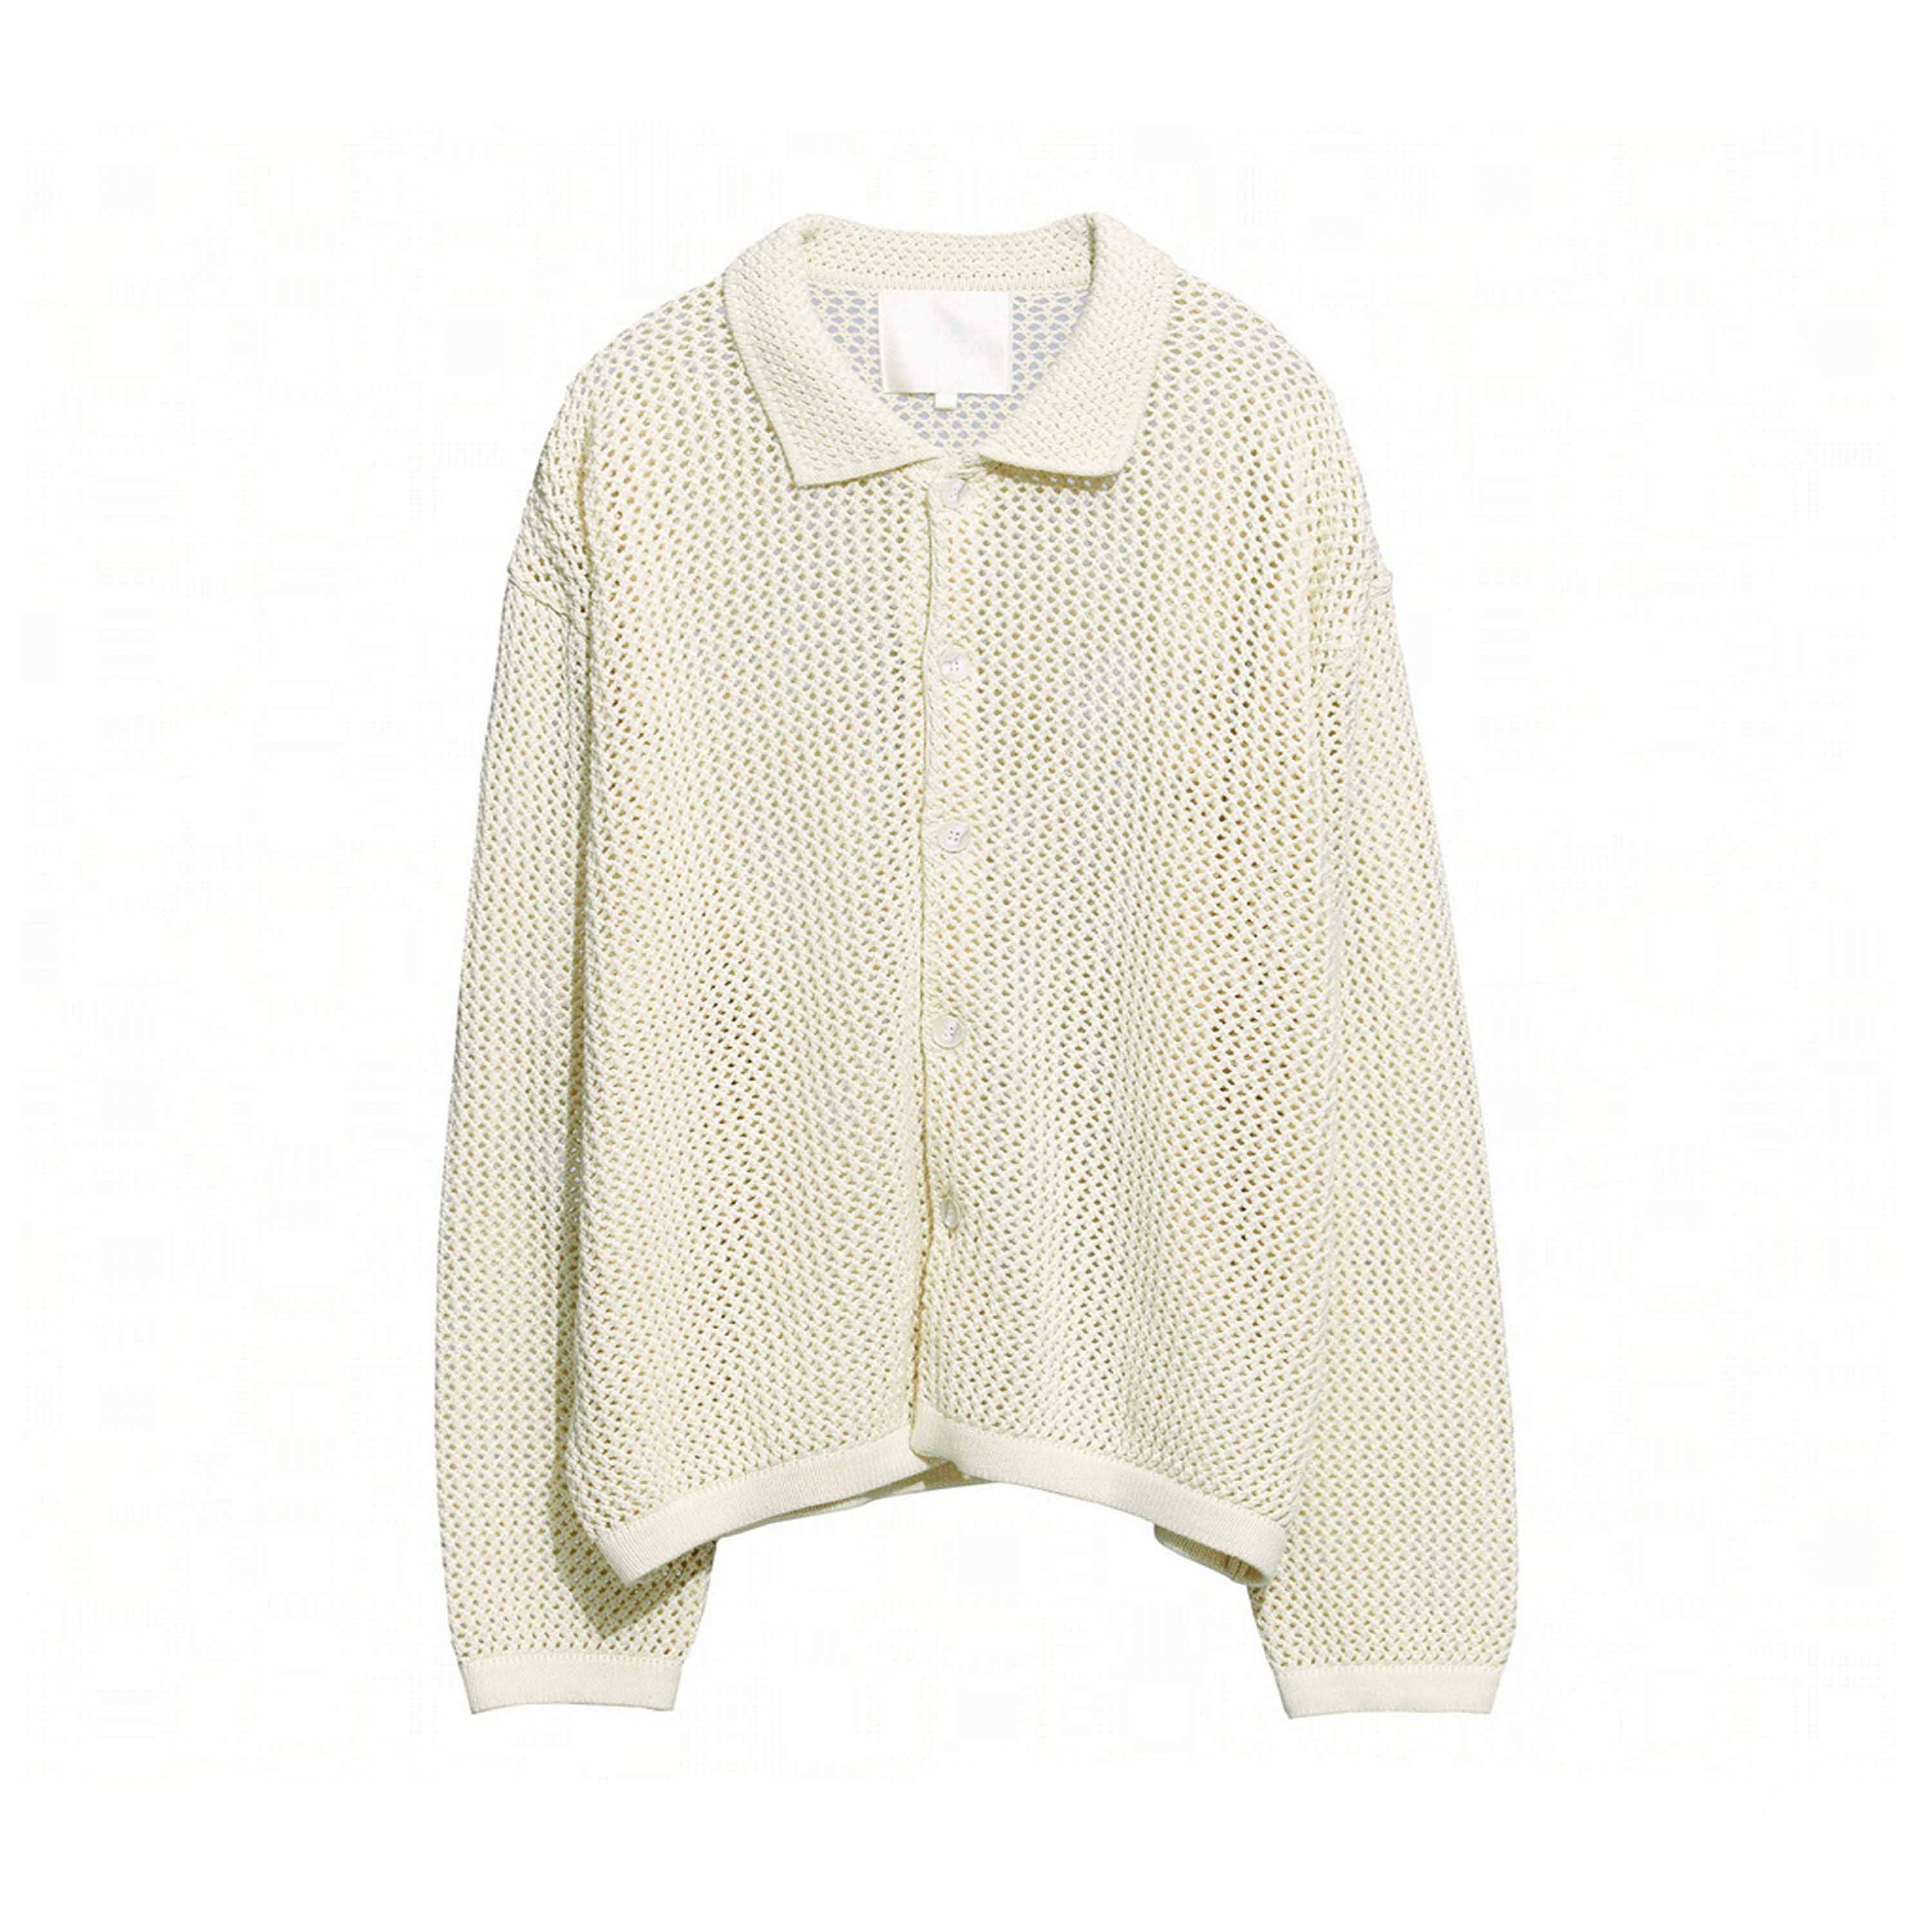 NETTED COLLAR CARDIGAN - NATURAL